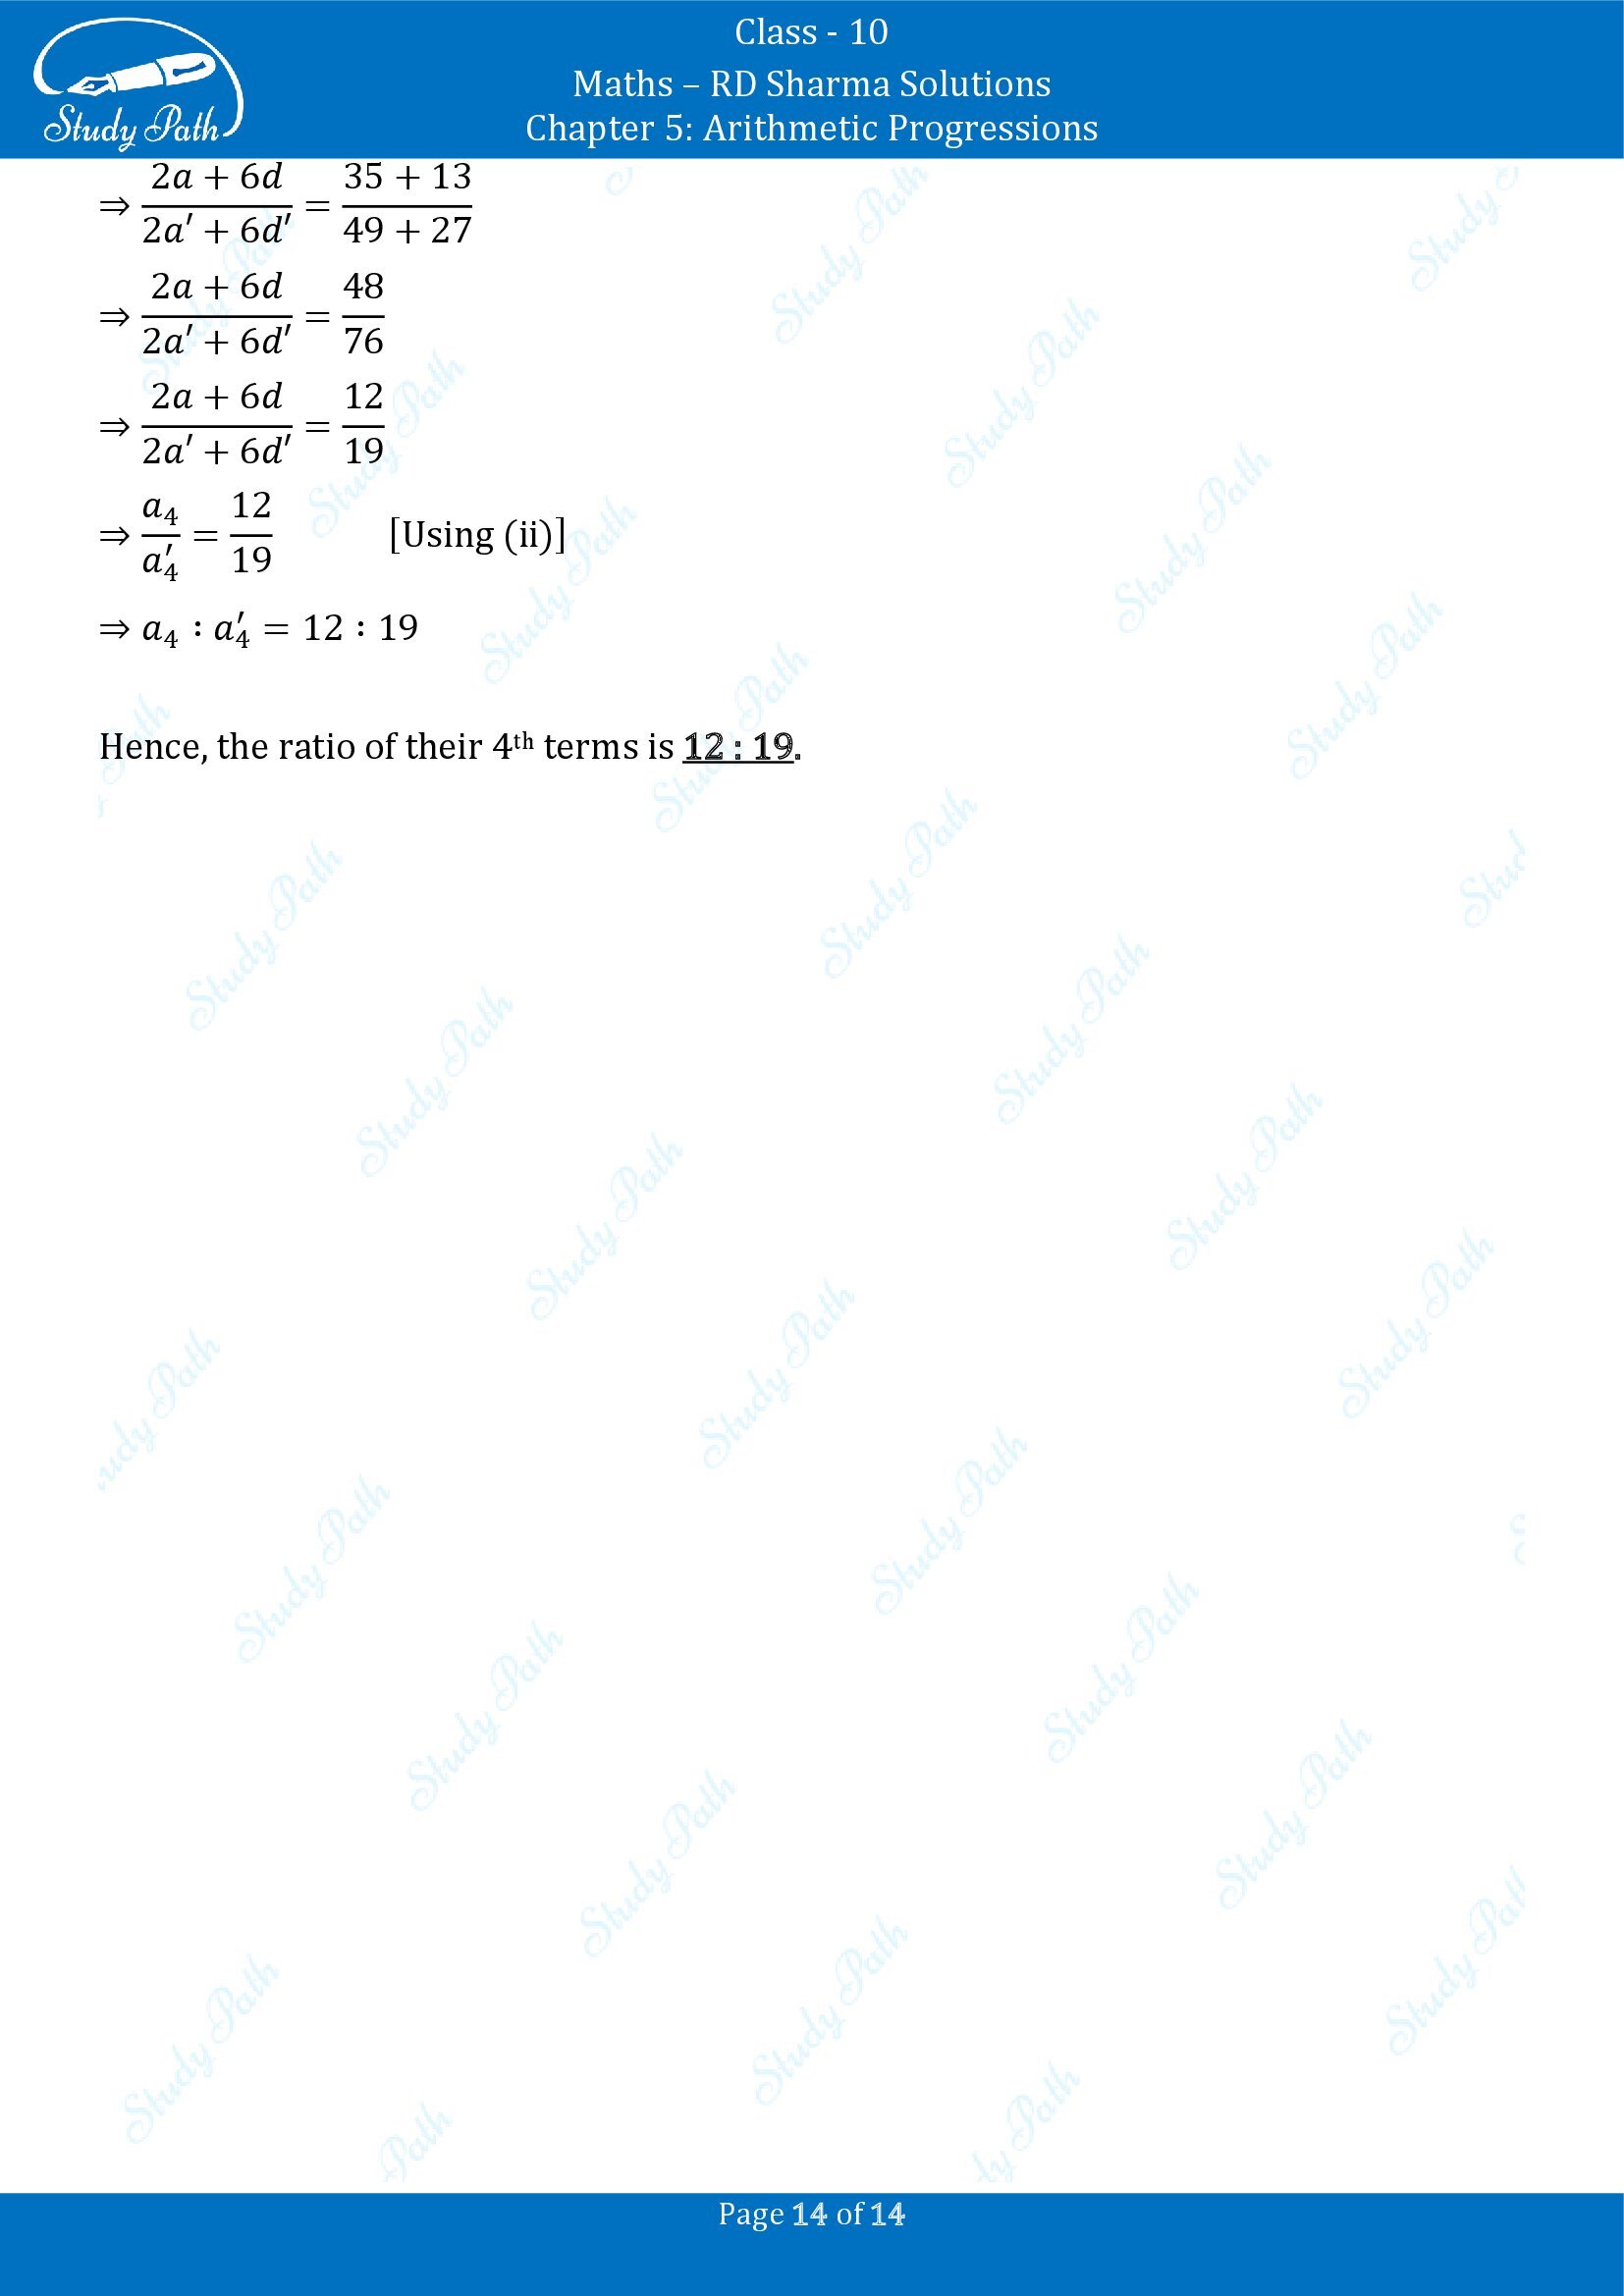 RD Sharma Solutions Class 10 Chapter 5 Arithmetic Progressions Fill in the Blank Type Questions FBQs 00014